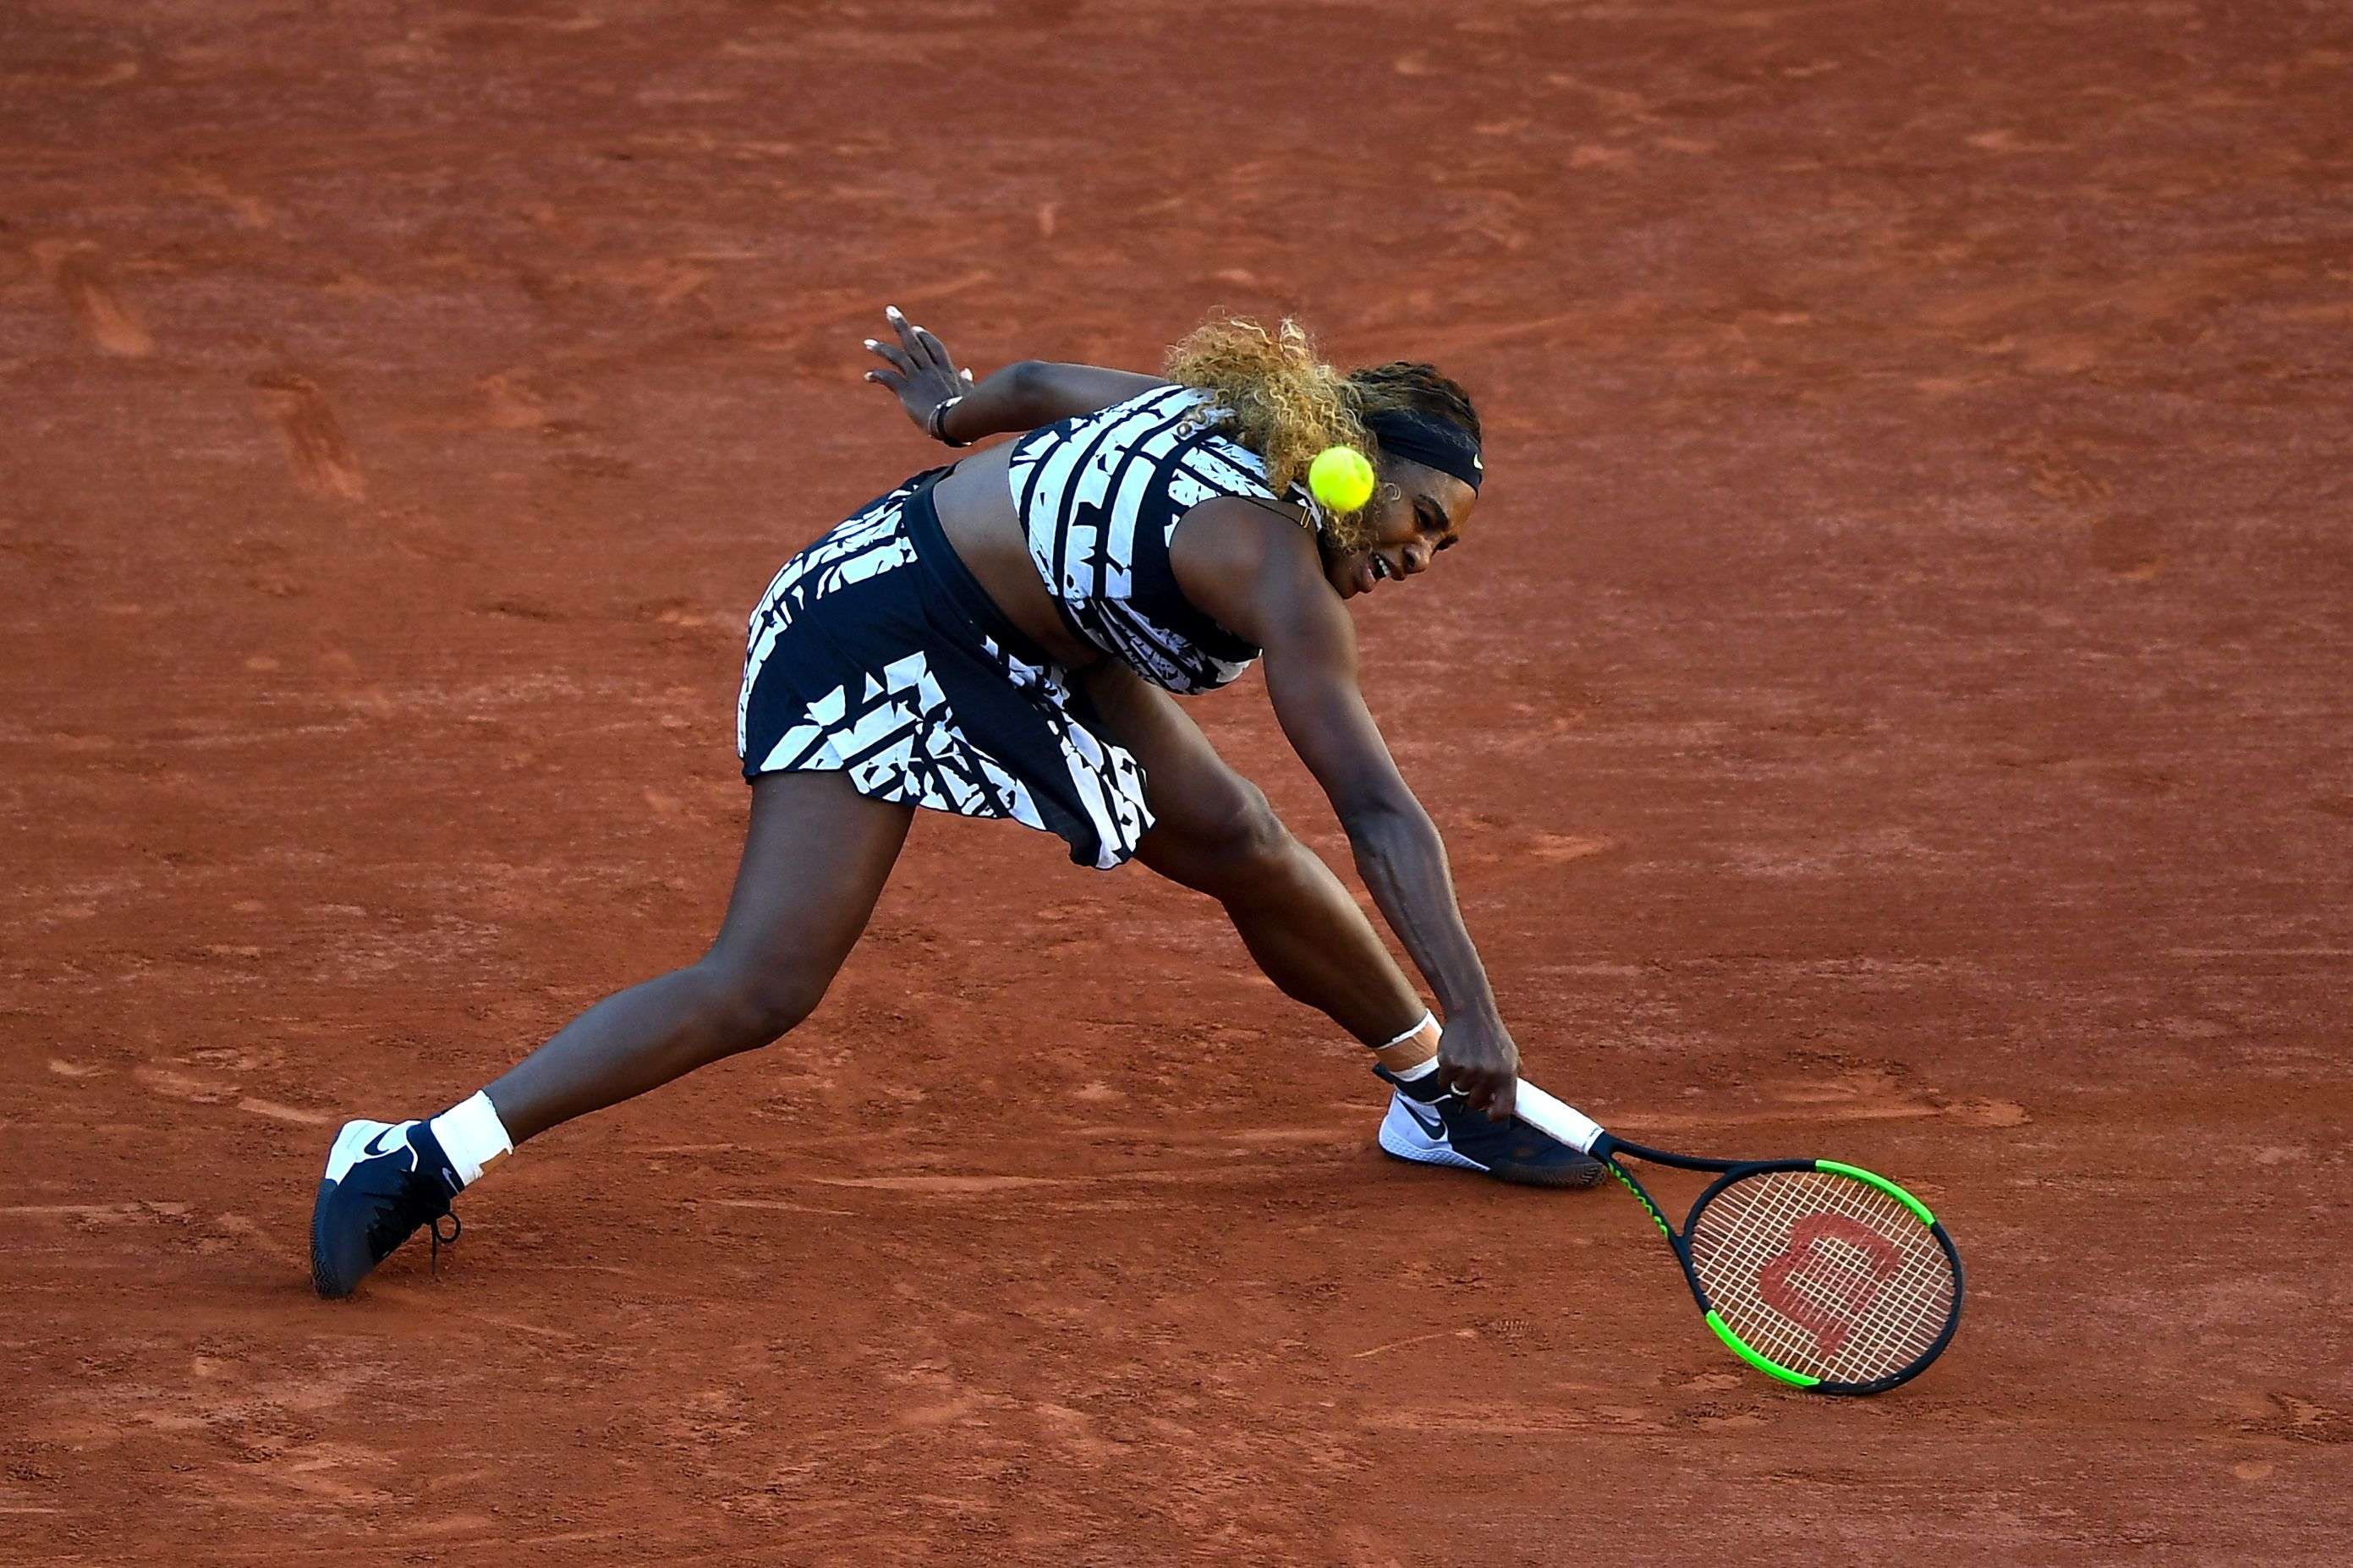 Serena and Naomi knocked out of French Open 2019